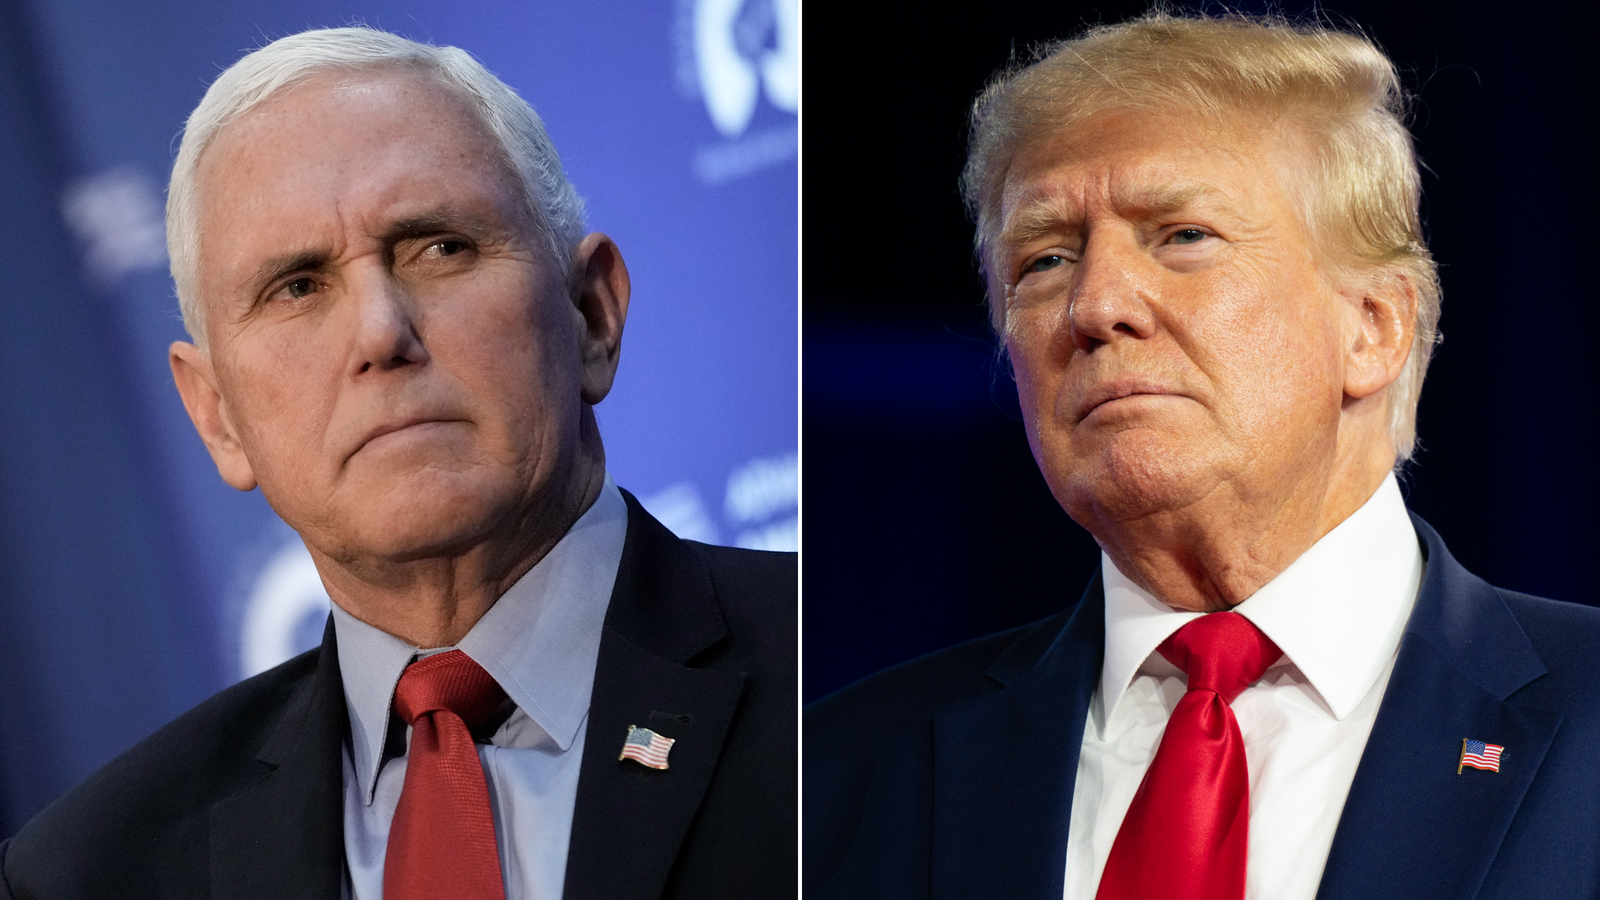 Former President Donald Trump has appealed a judge's order that former Vice President Mike Pence mu...